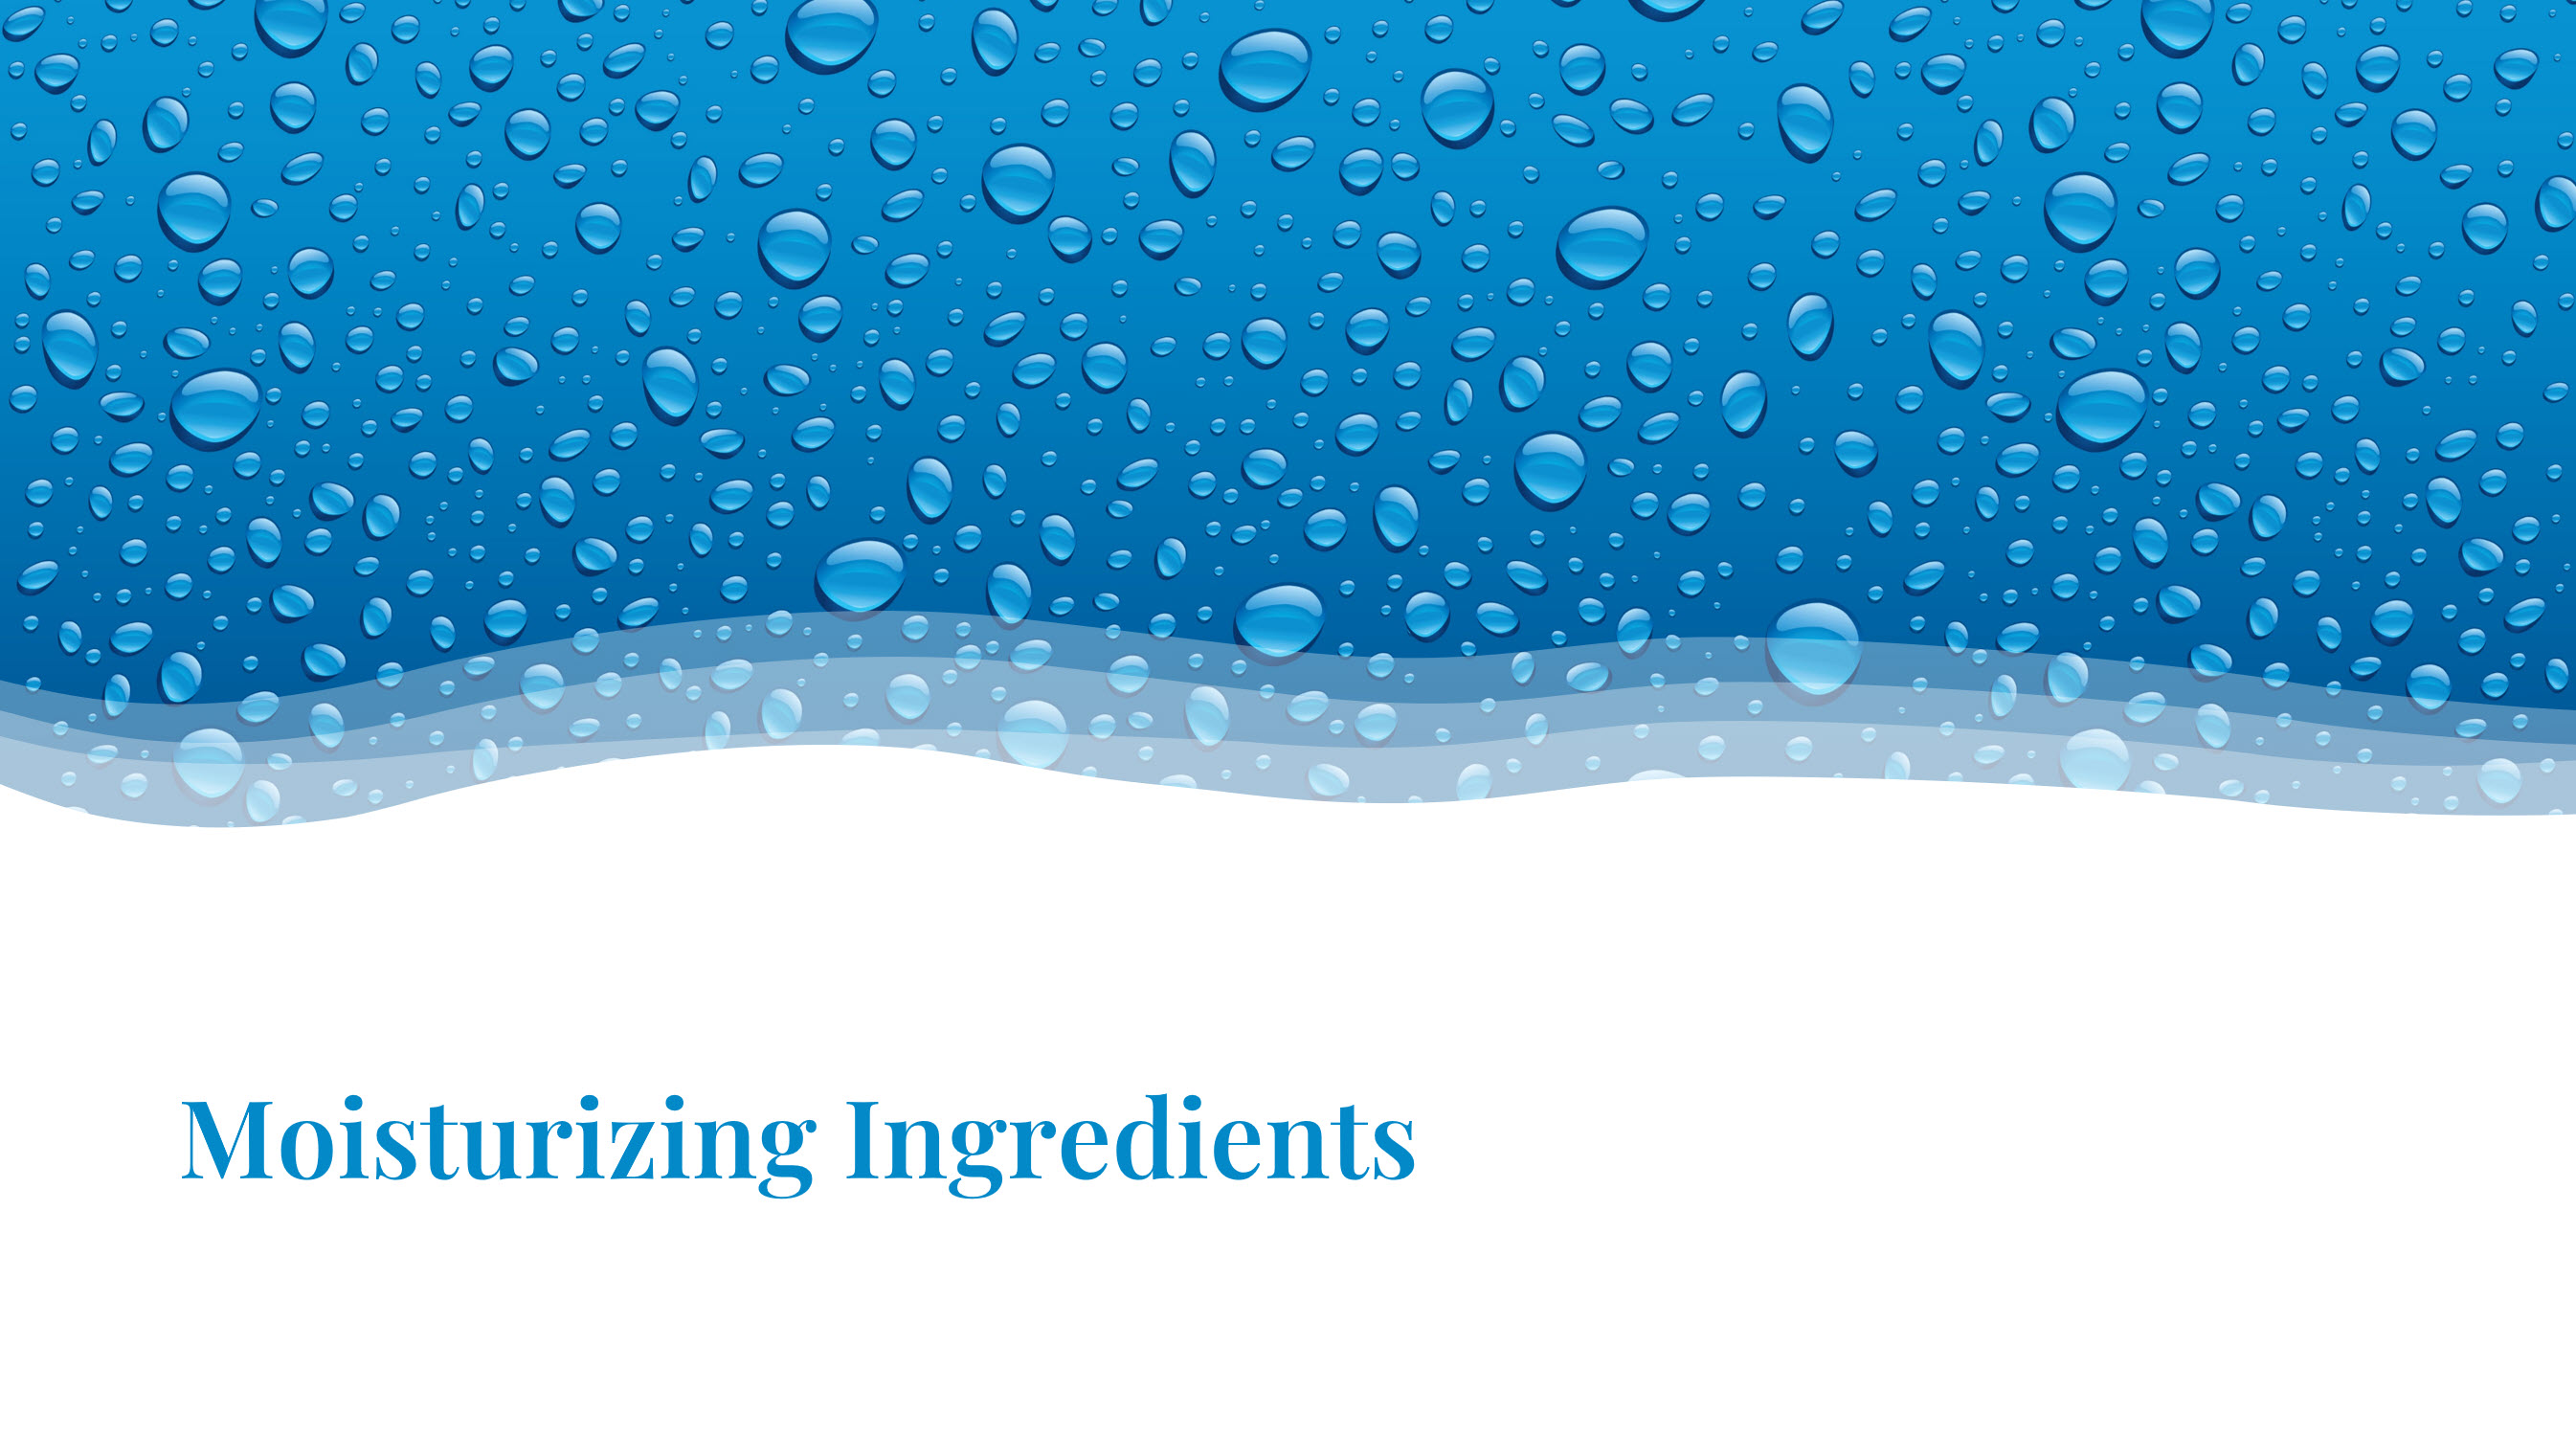 Water droplets with the words Moisturizing ingredients